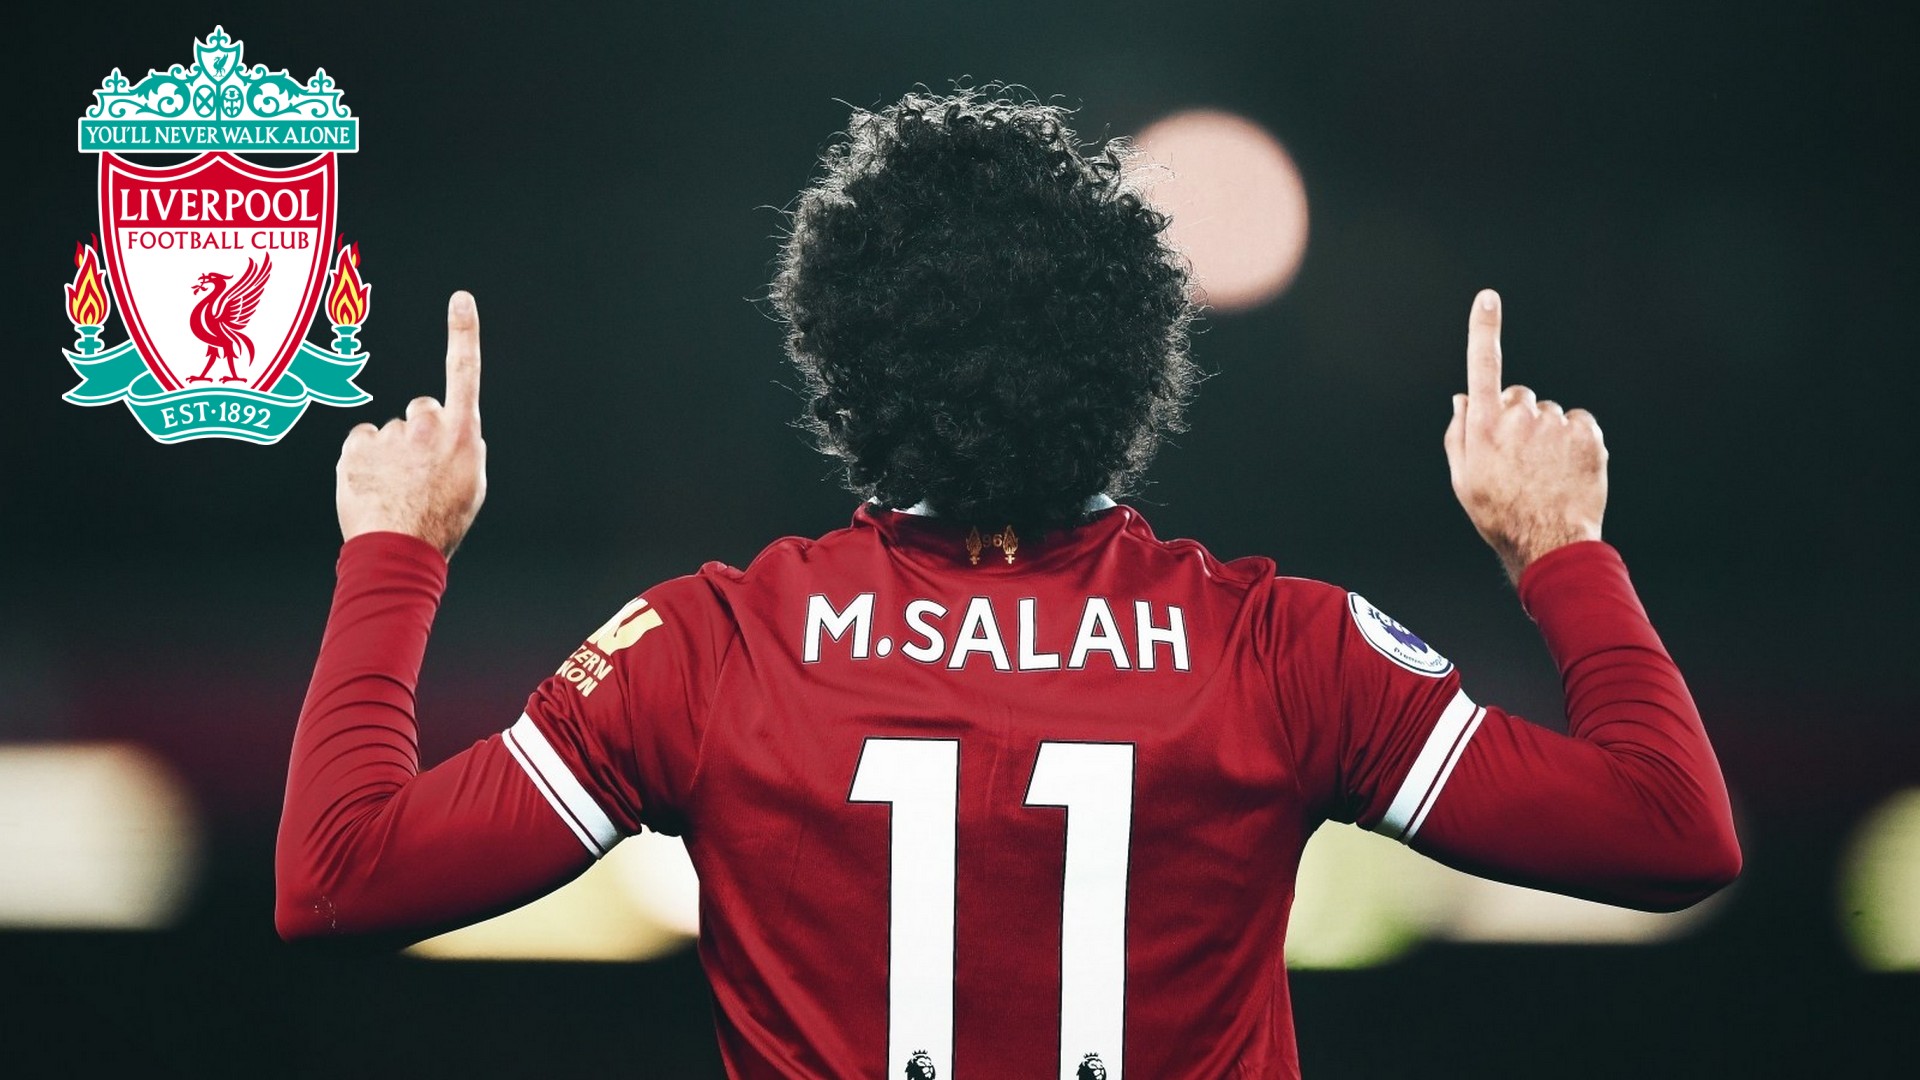 Wallpaper Liverpool Mohamed Salah Desktop with resolution 1920X1080 pixel. You can use this wallpaper as background for your desktop Computer Screensavers, Android or iPhone smartphones